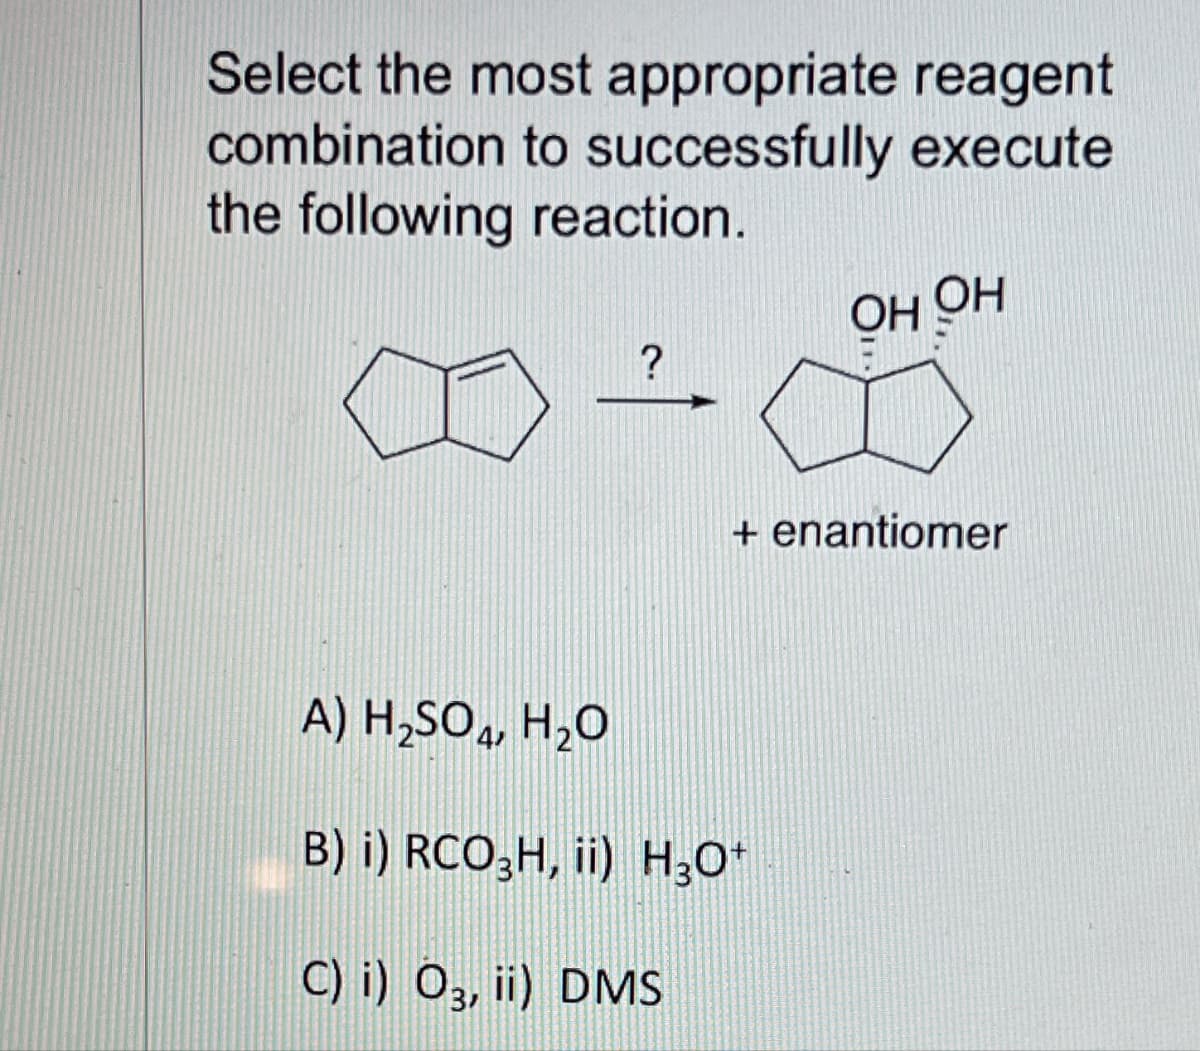 Select the most appropriate reagent
combination to successfully execute
the following reaction.
?
OH OH
+ enantiomer
A) H₂SO4, H₂O
B) i) RCO3H, ii) H3O+
C) i) 03, ii) DMS